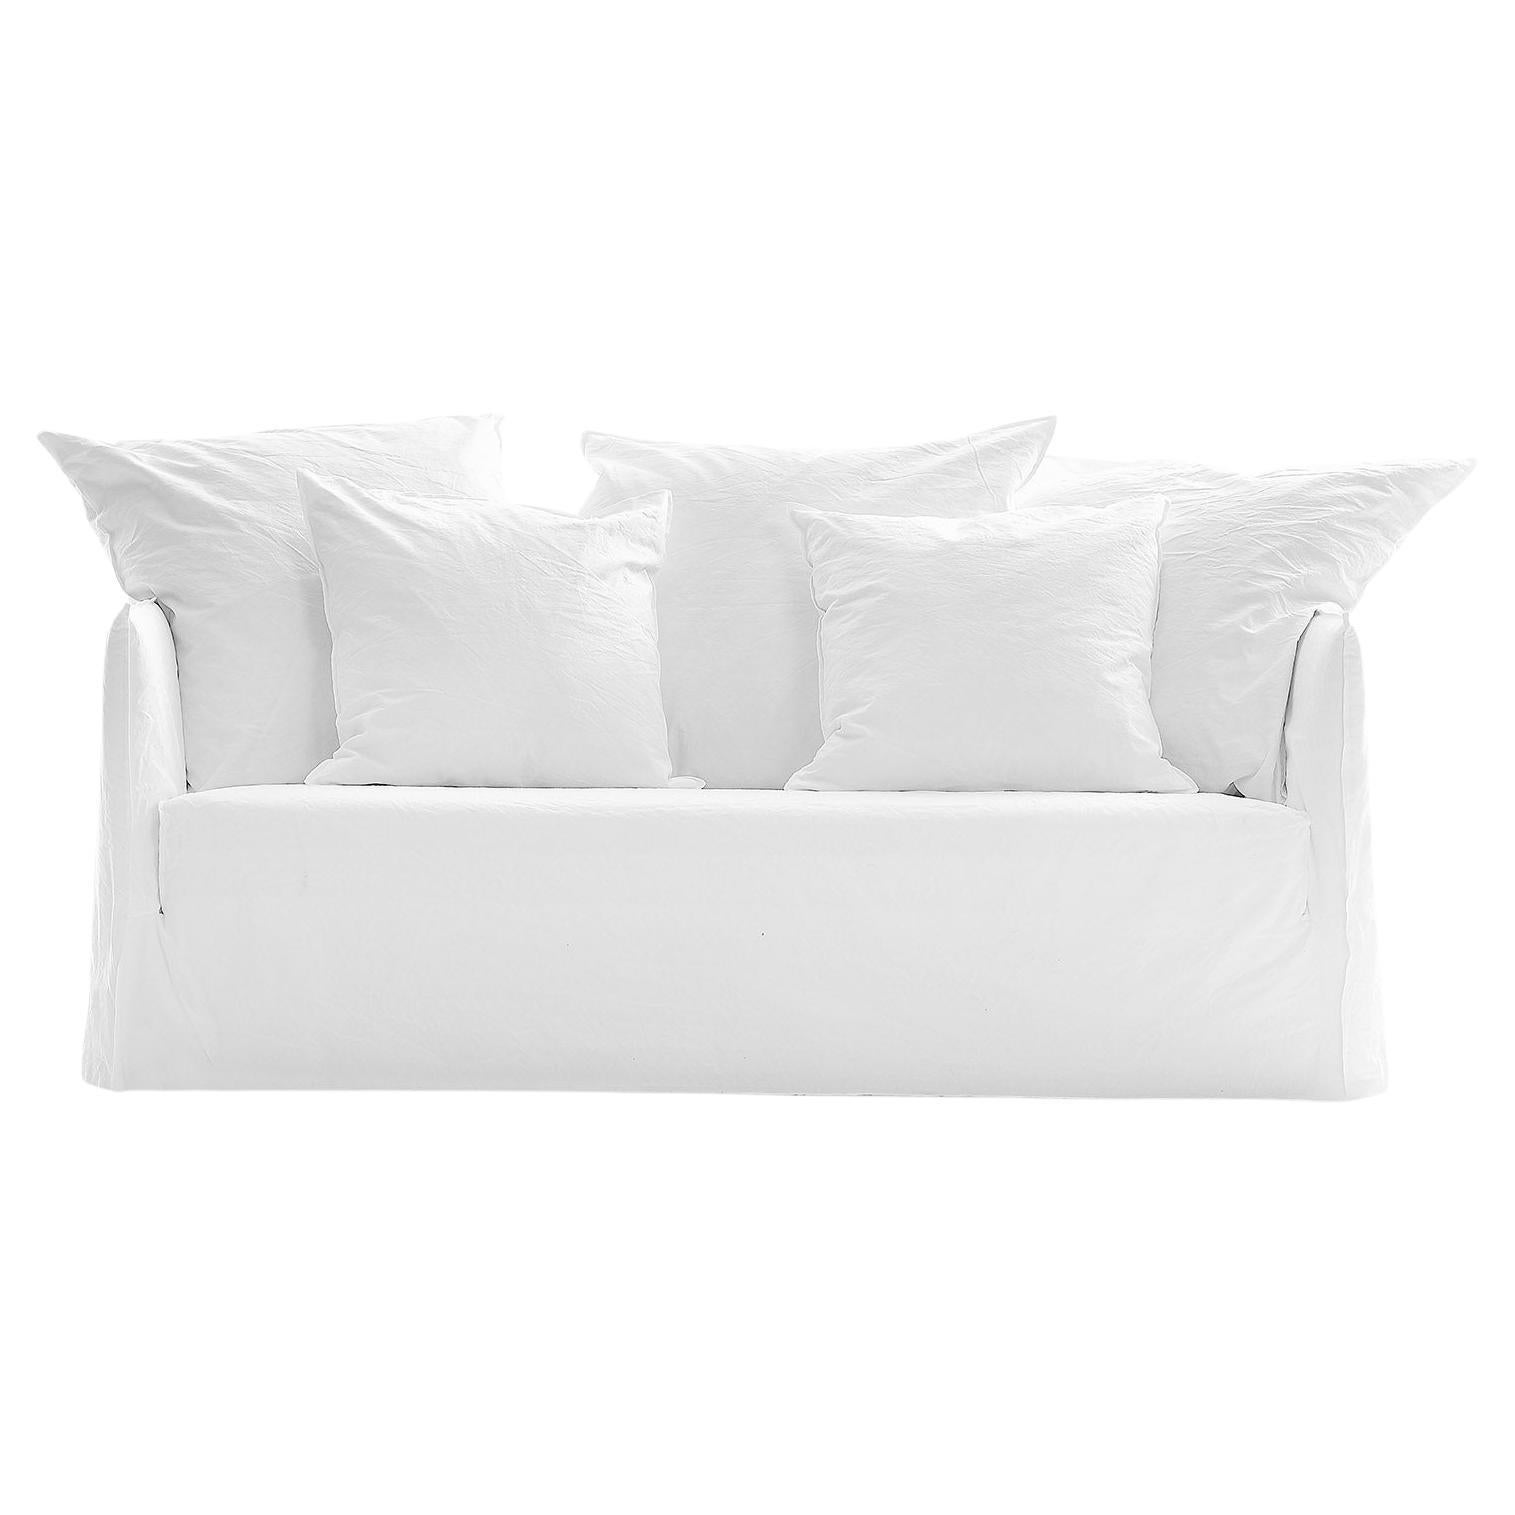 Gervasoni Ghost 110 Sofa in White Linen Upholstery by Paola Navone For Sale